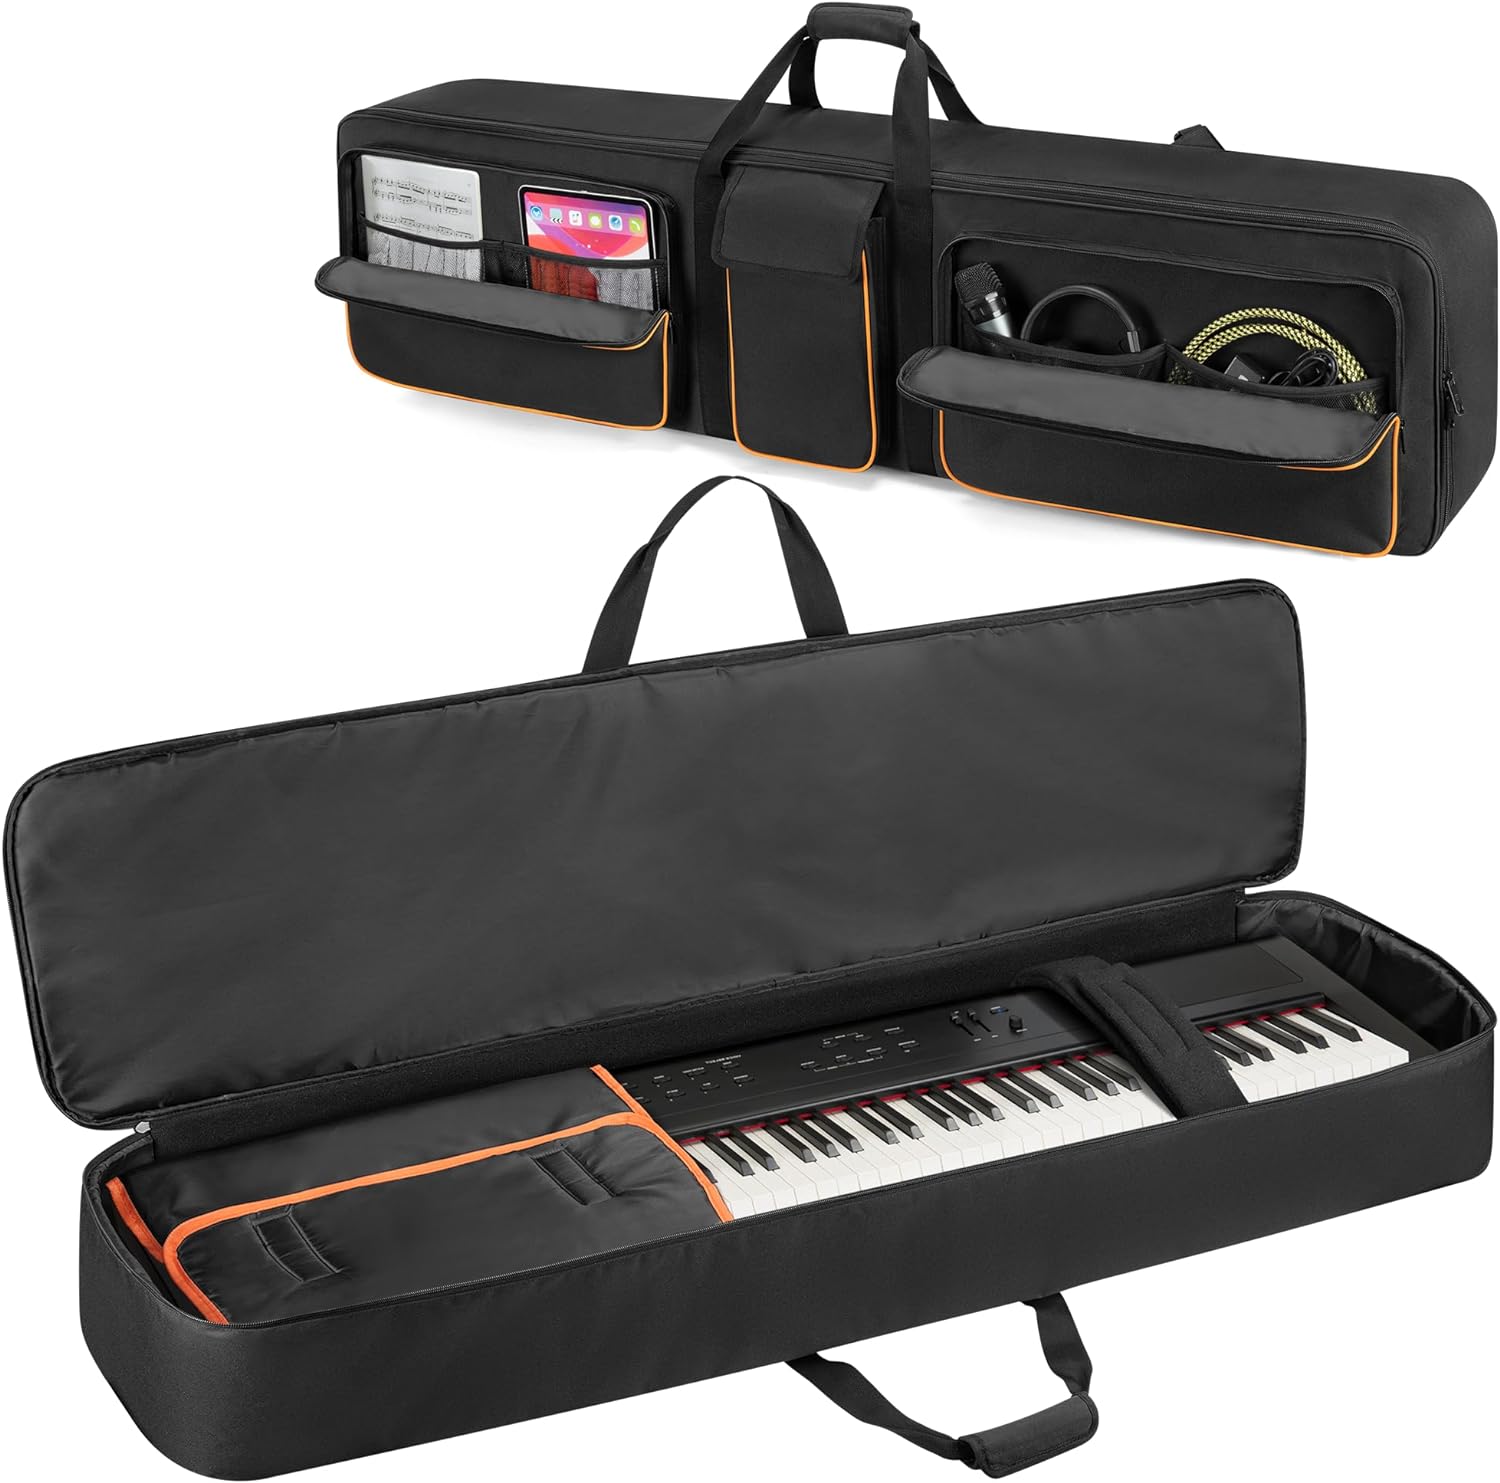 Soft Piano Bag with Padded Handle and Detachable Shoulder Strap, Travel Keyboard Gig Bag